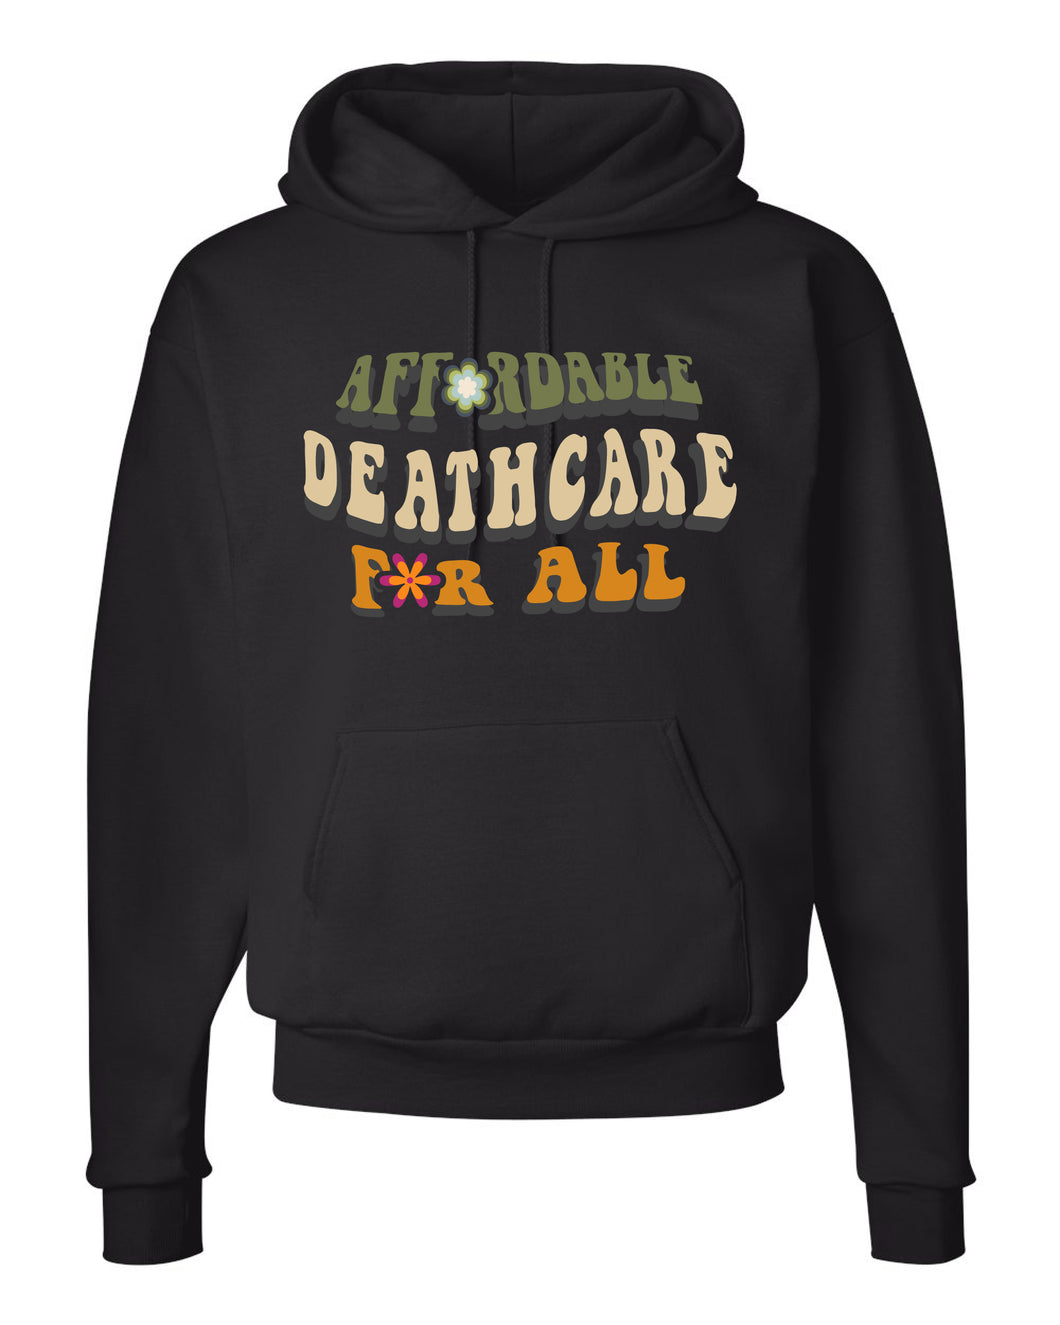 Affordable Deathcare for All Hooded Sweatshirt